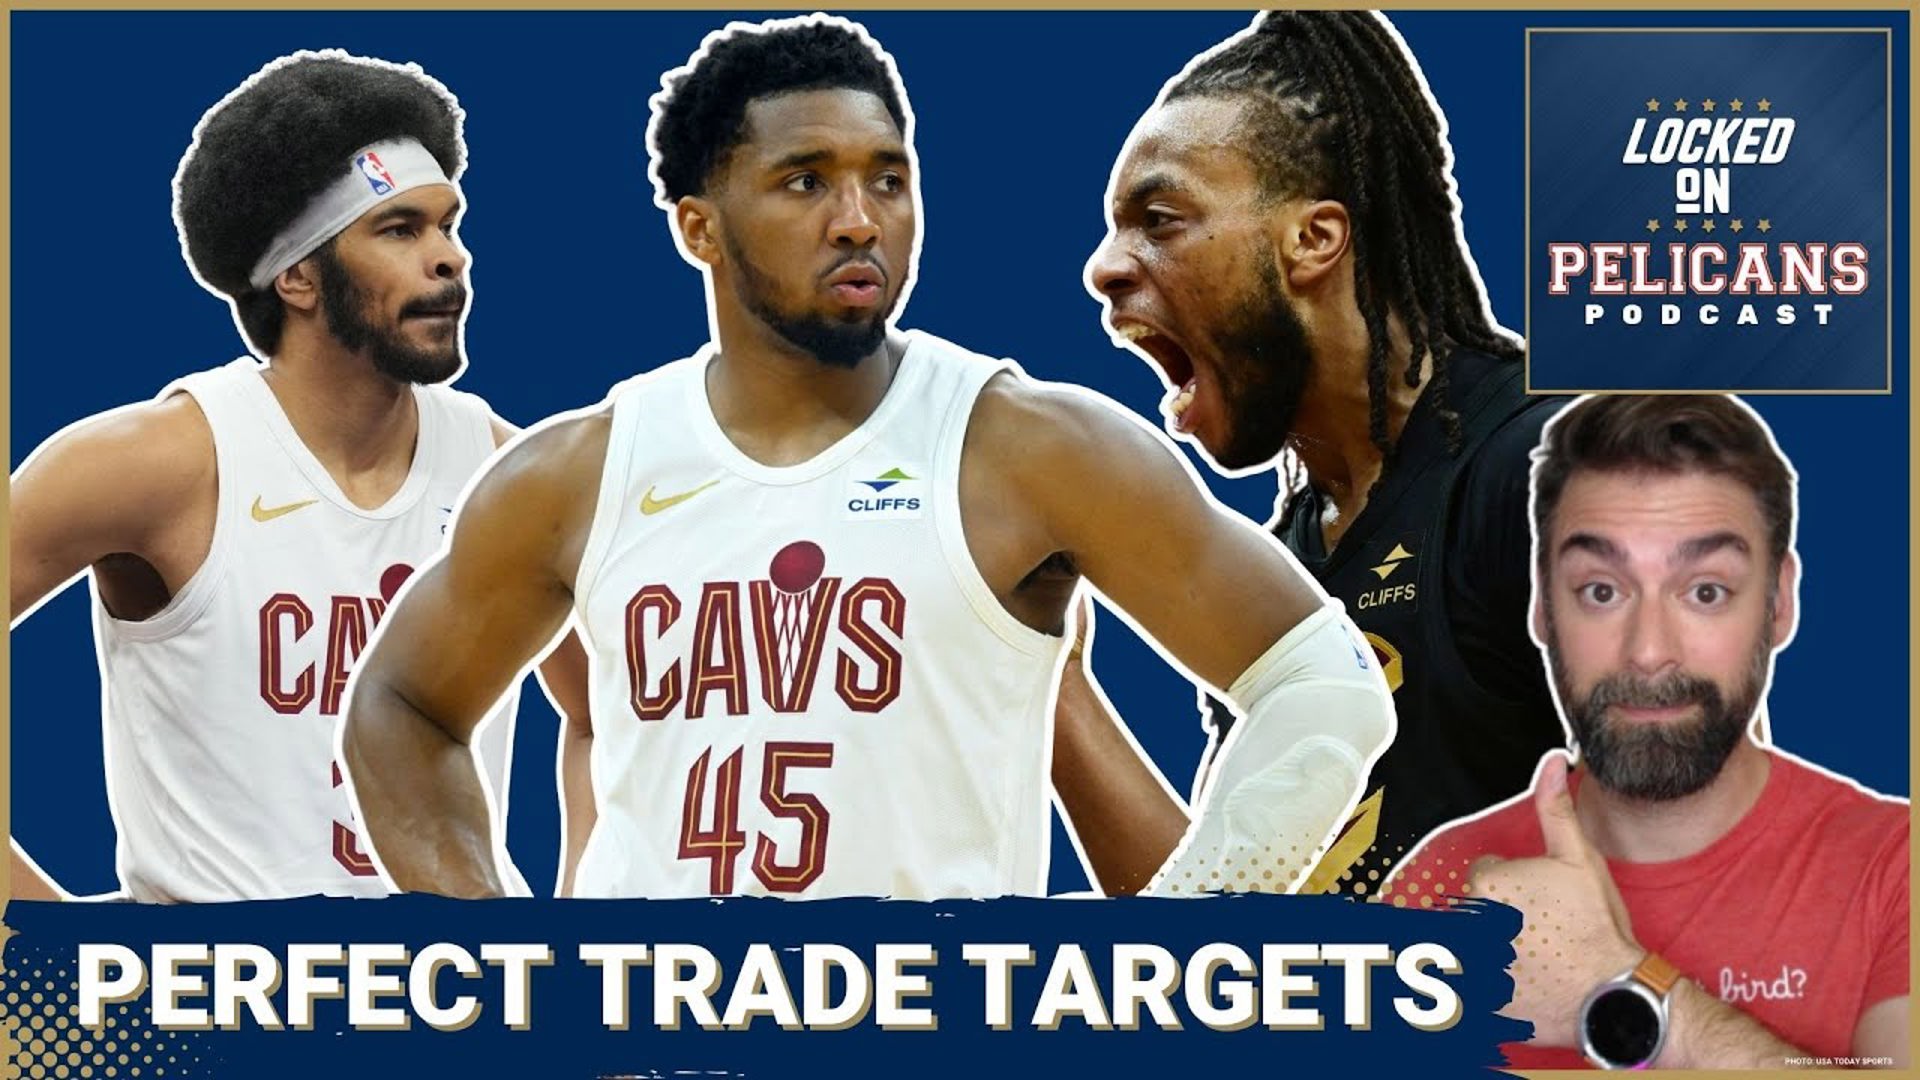 Donovan Mitchell from Cleveland Cavaliers is the PERFECT trade target ...